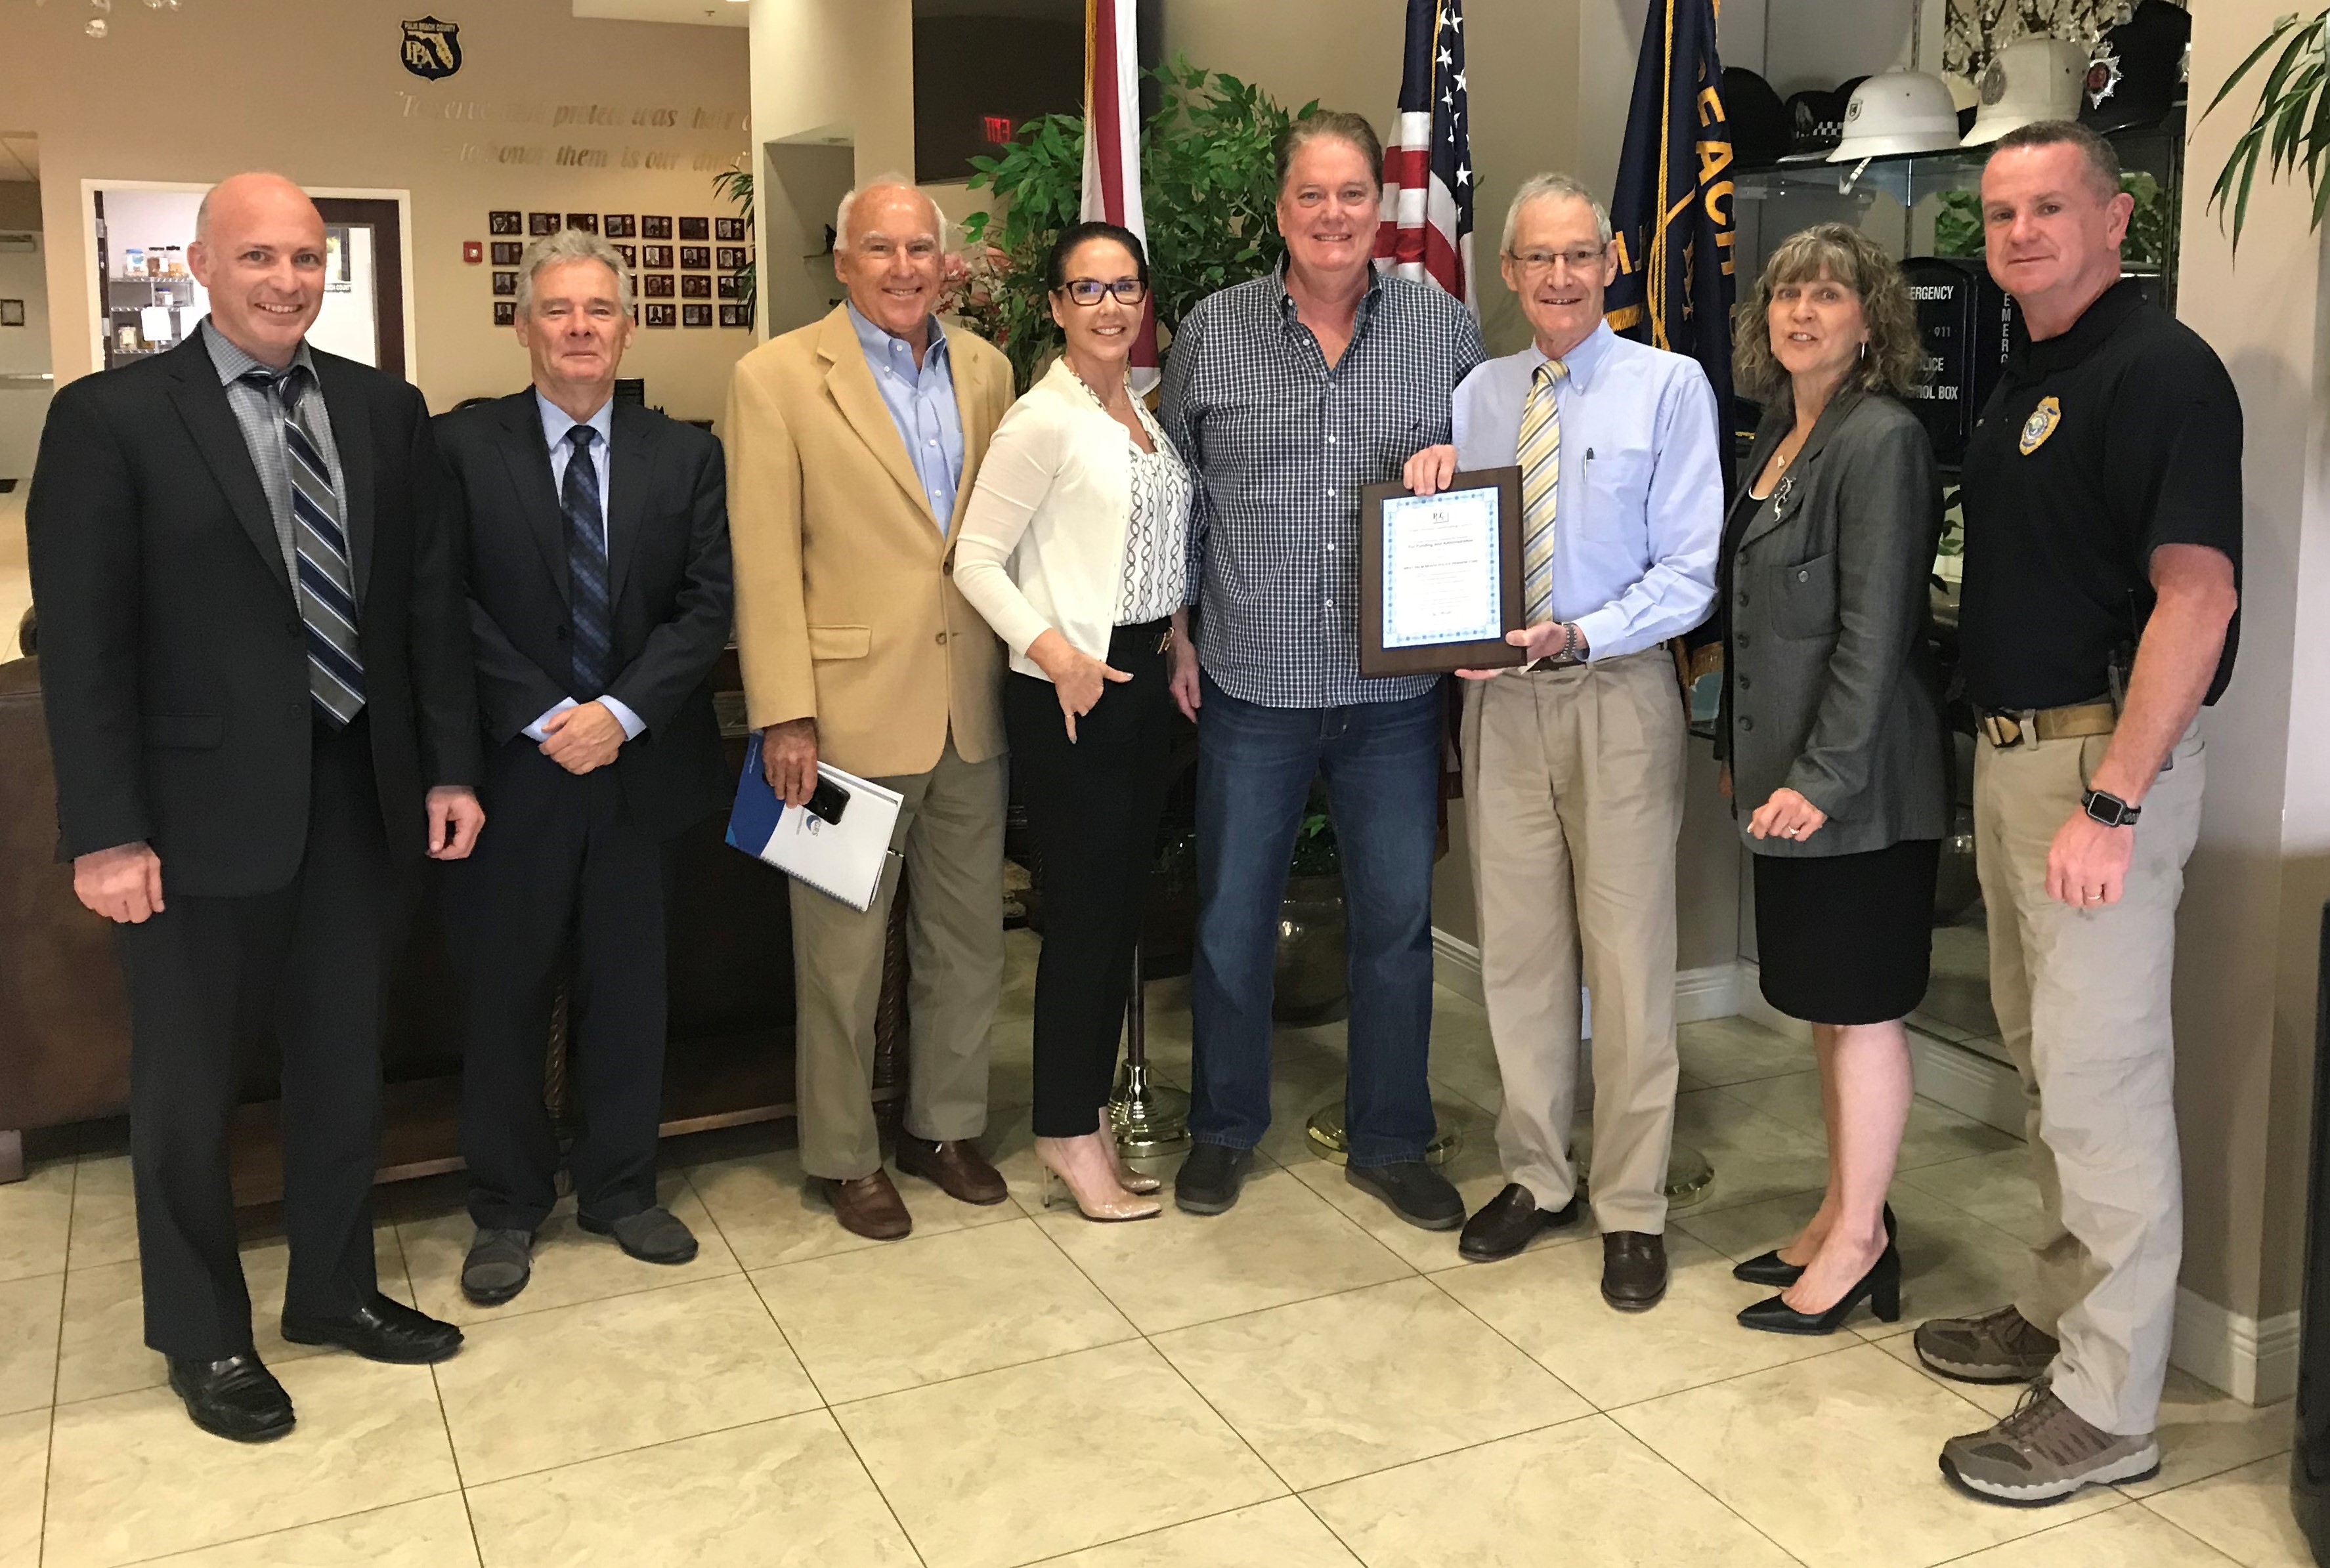 Chairman Jack Frost, was presented the 2018 Public Pension Coordinating Council (PPCC) Award.